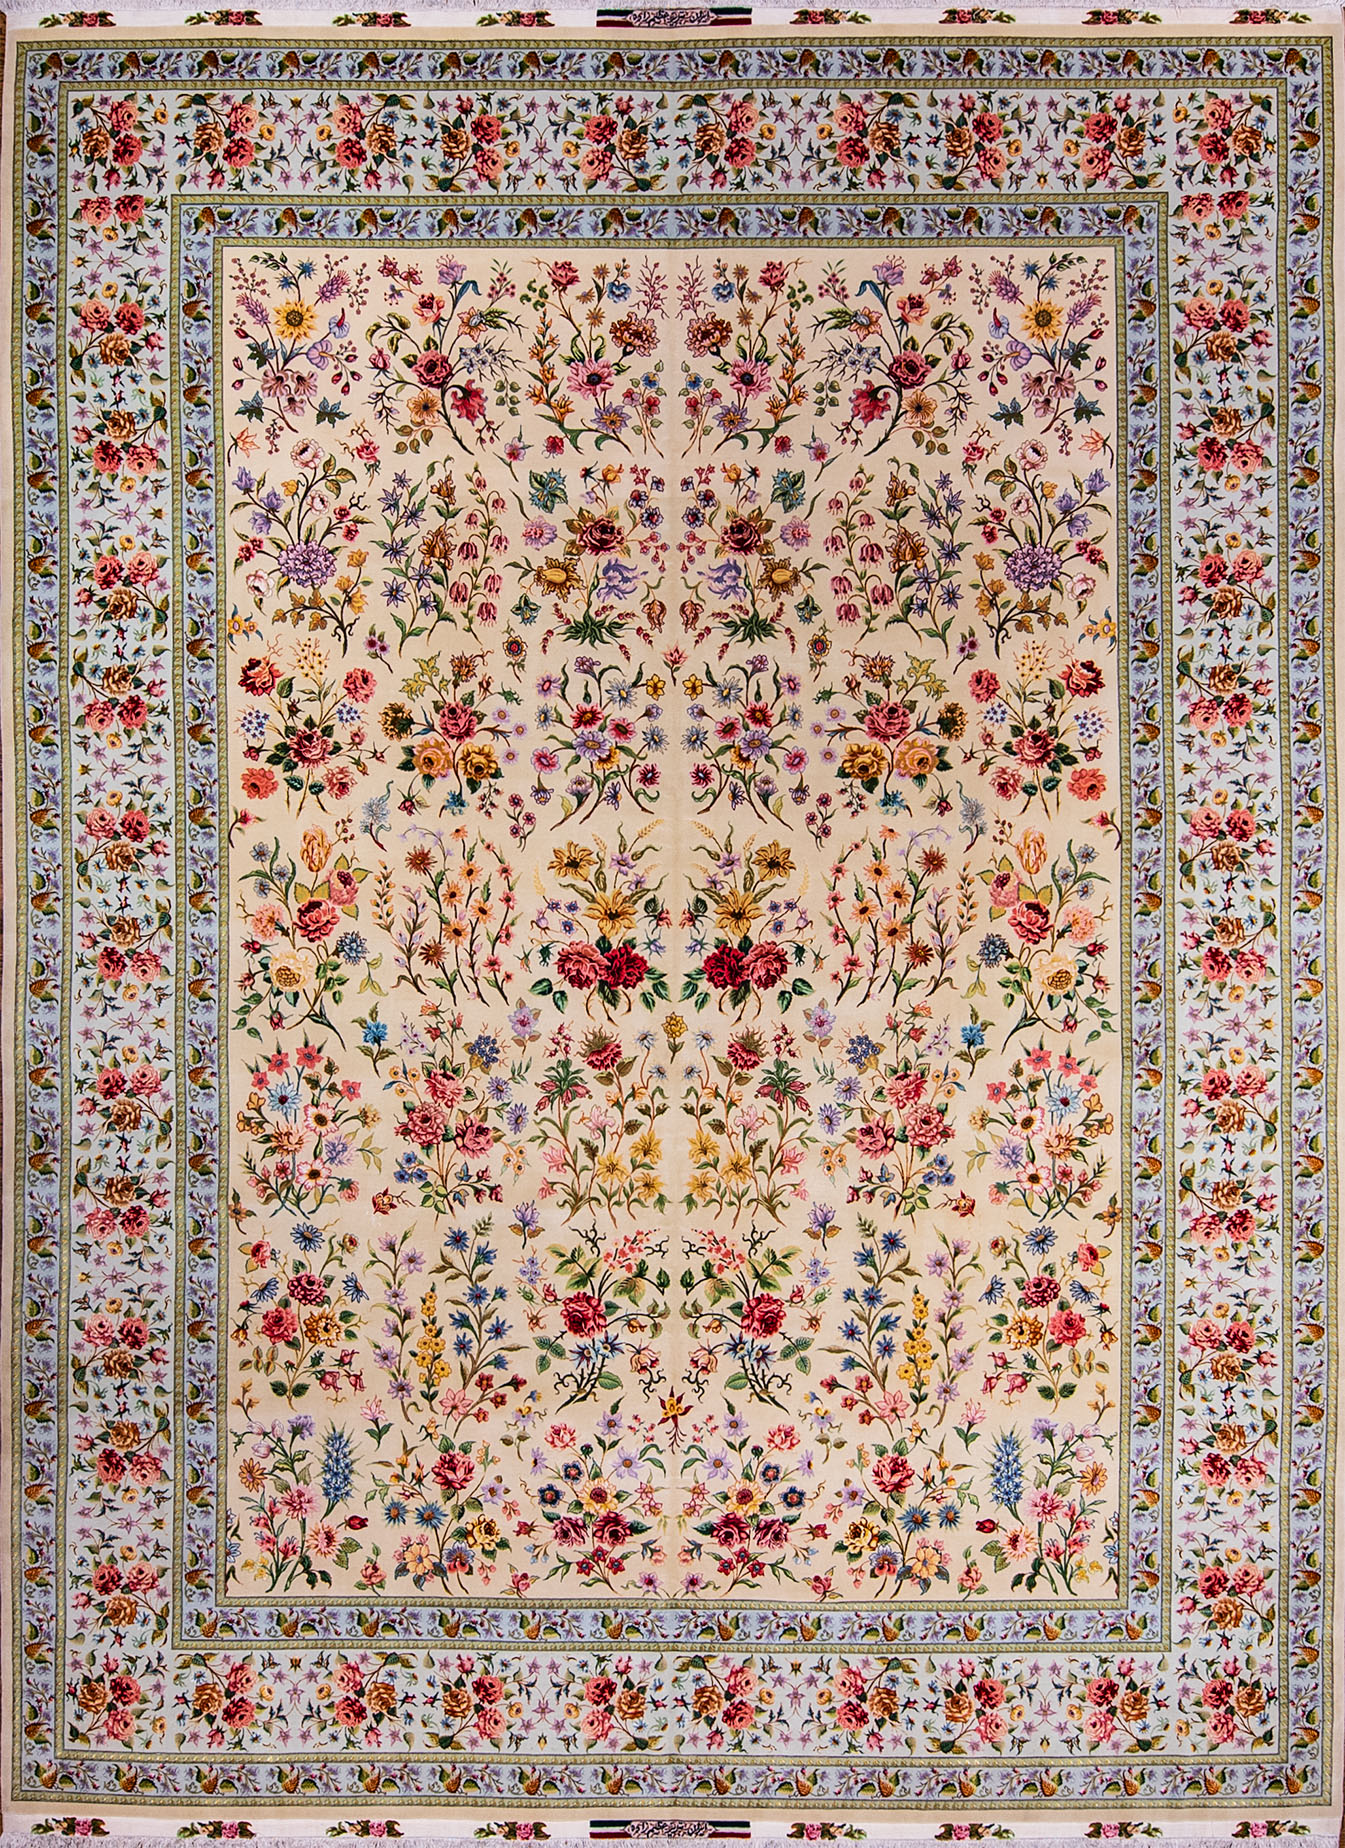 A gorgeous hand knotted multicolor floral Persian Tabriz rug woven by Azim Zadeh the renowned weaver of Iran. Size 9.6x13.6.